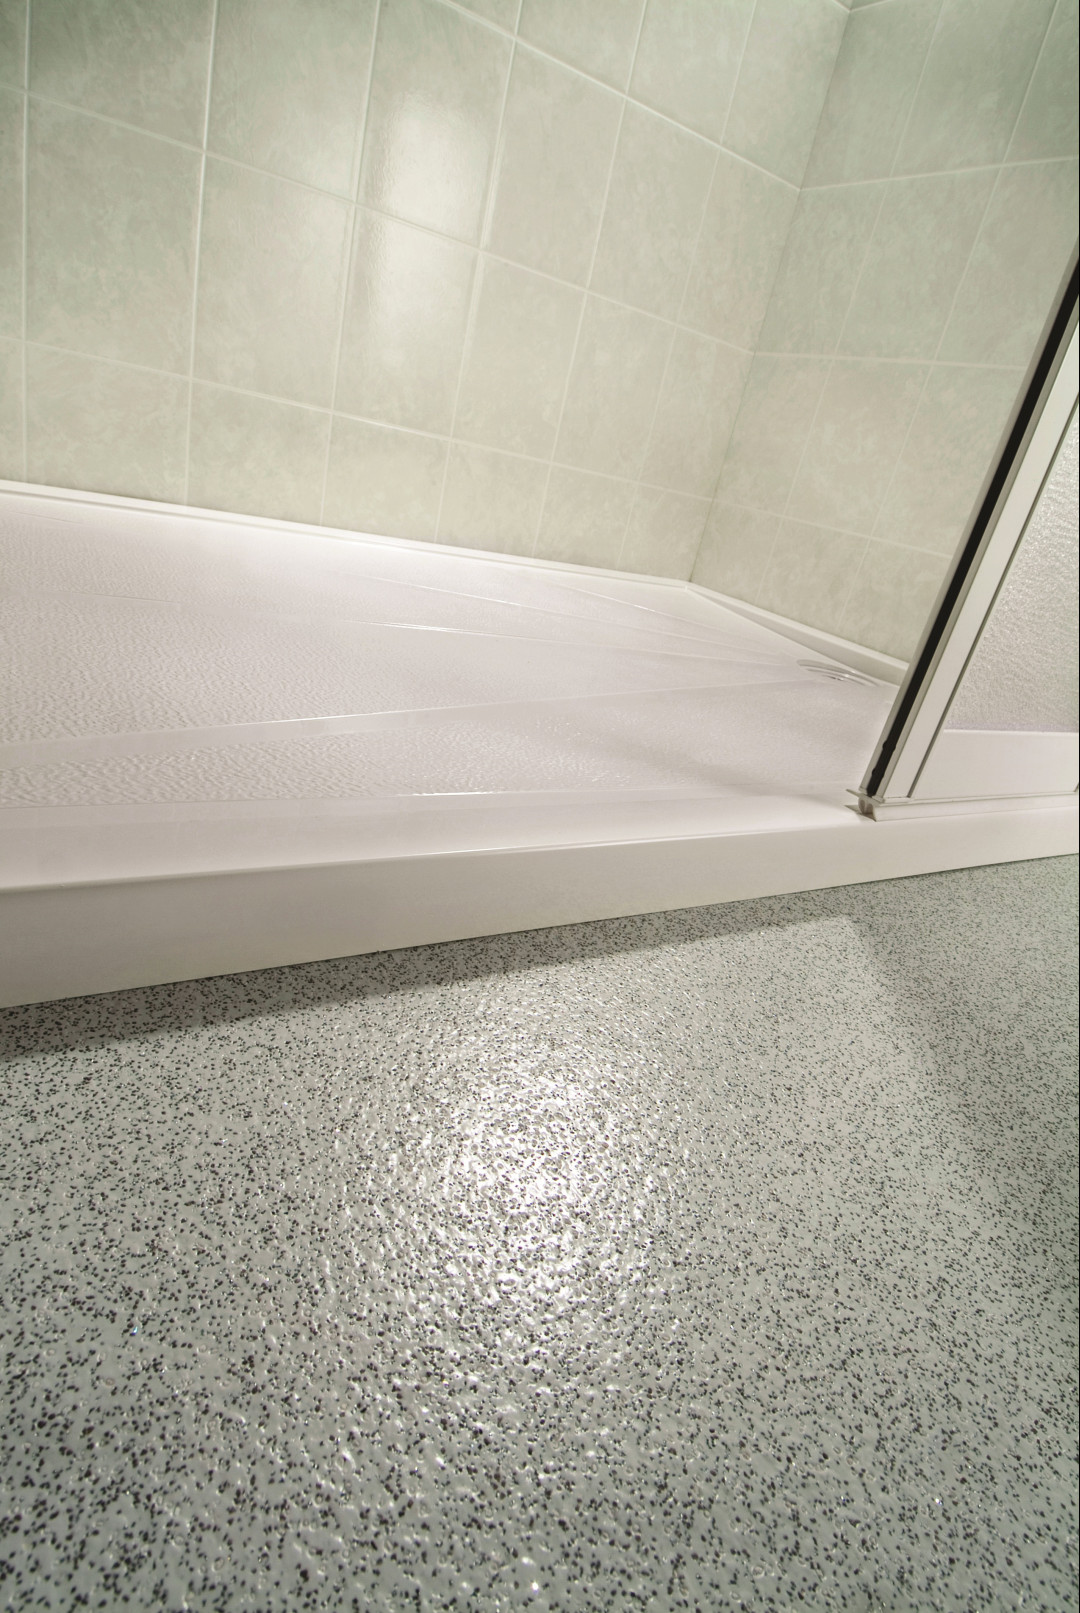 Easibathe 4 Sided Low Level Access Shower Tray 1